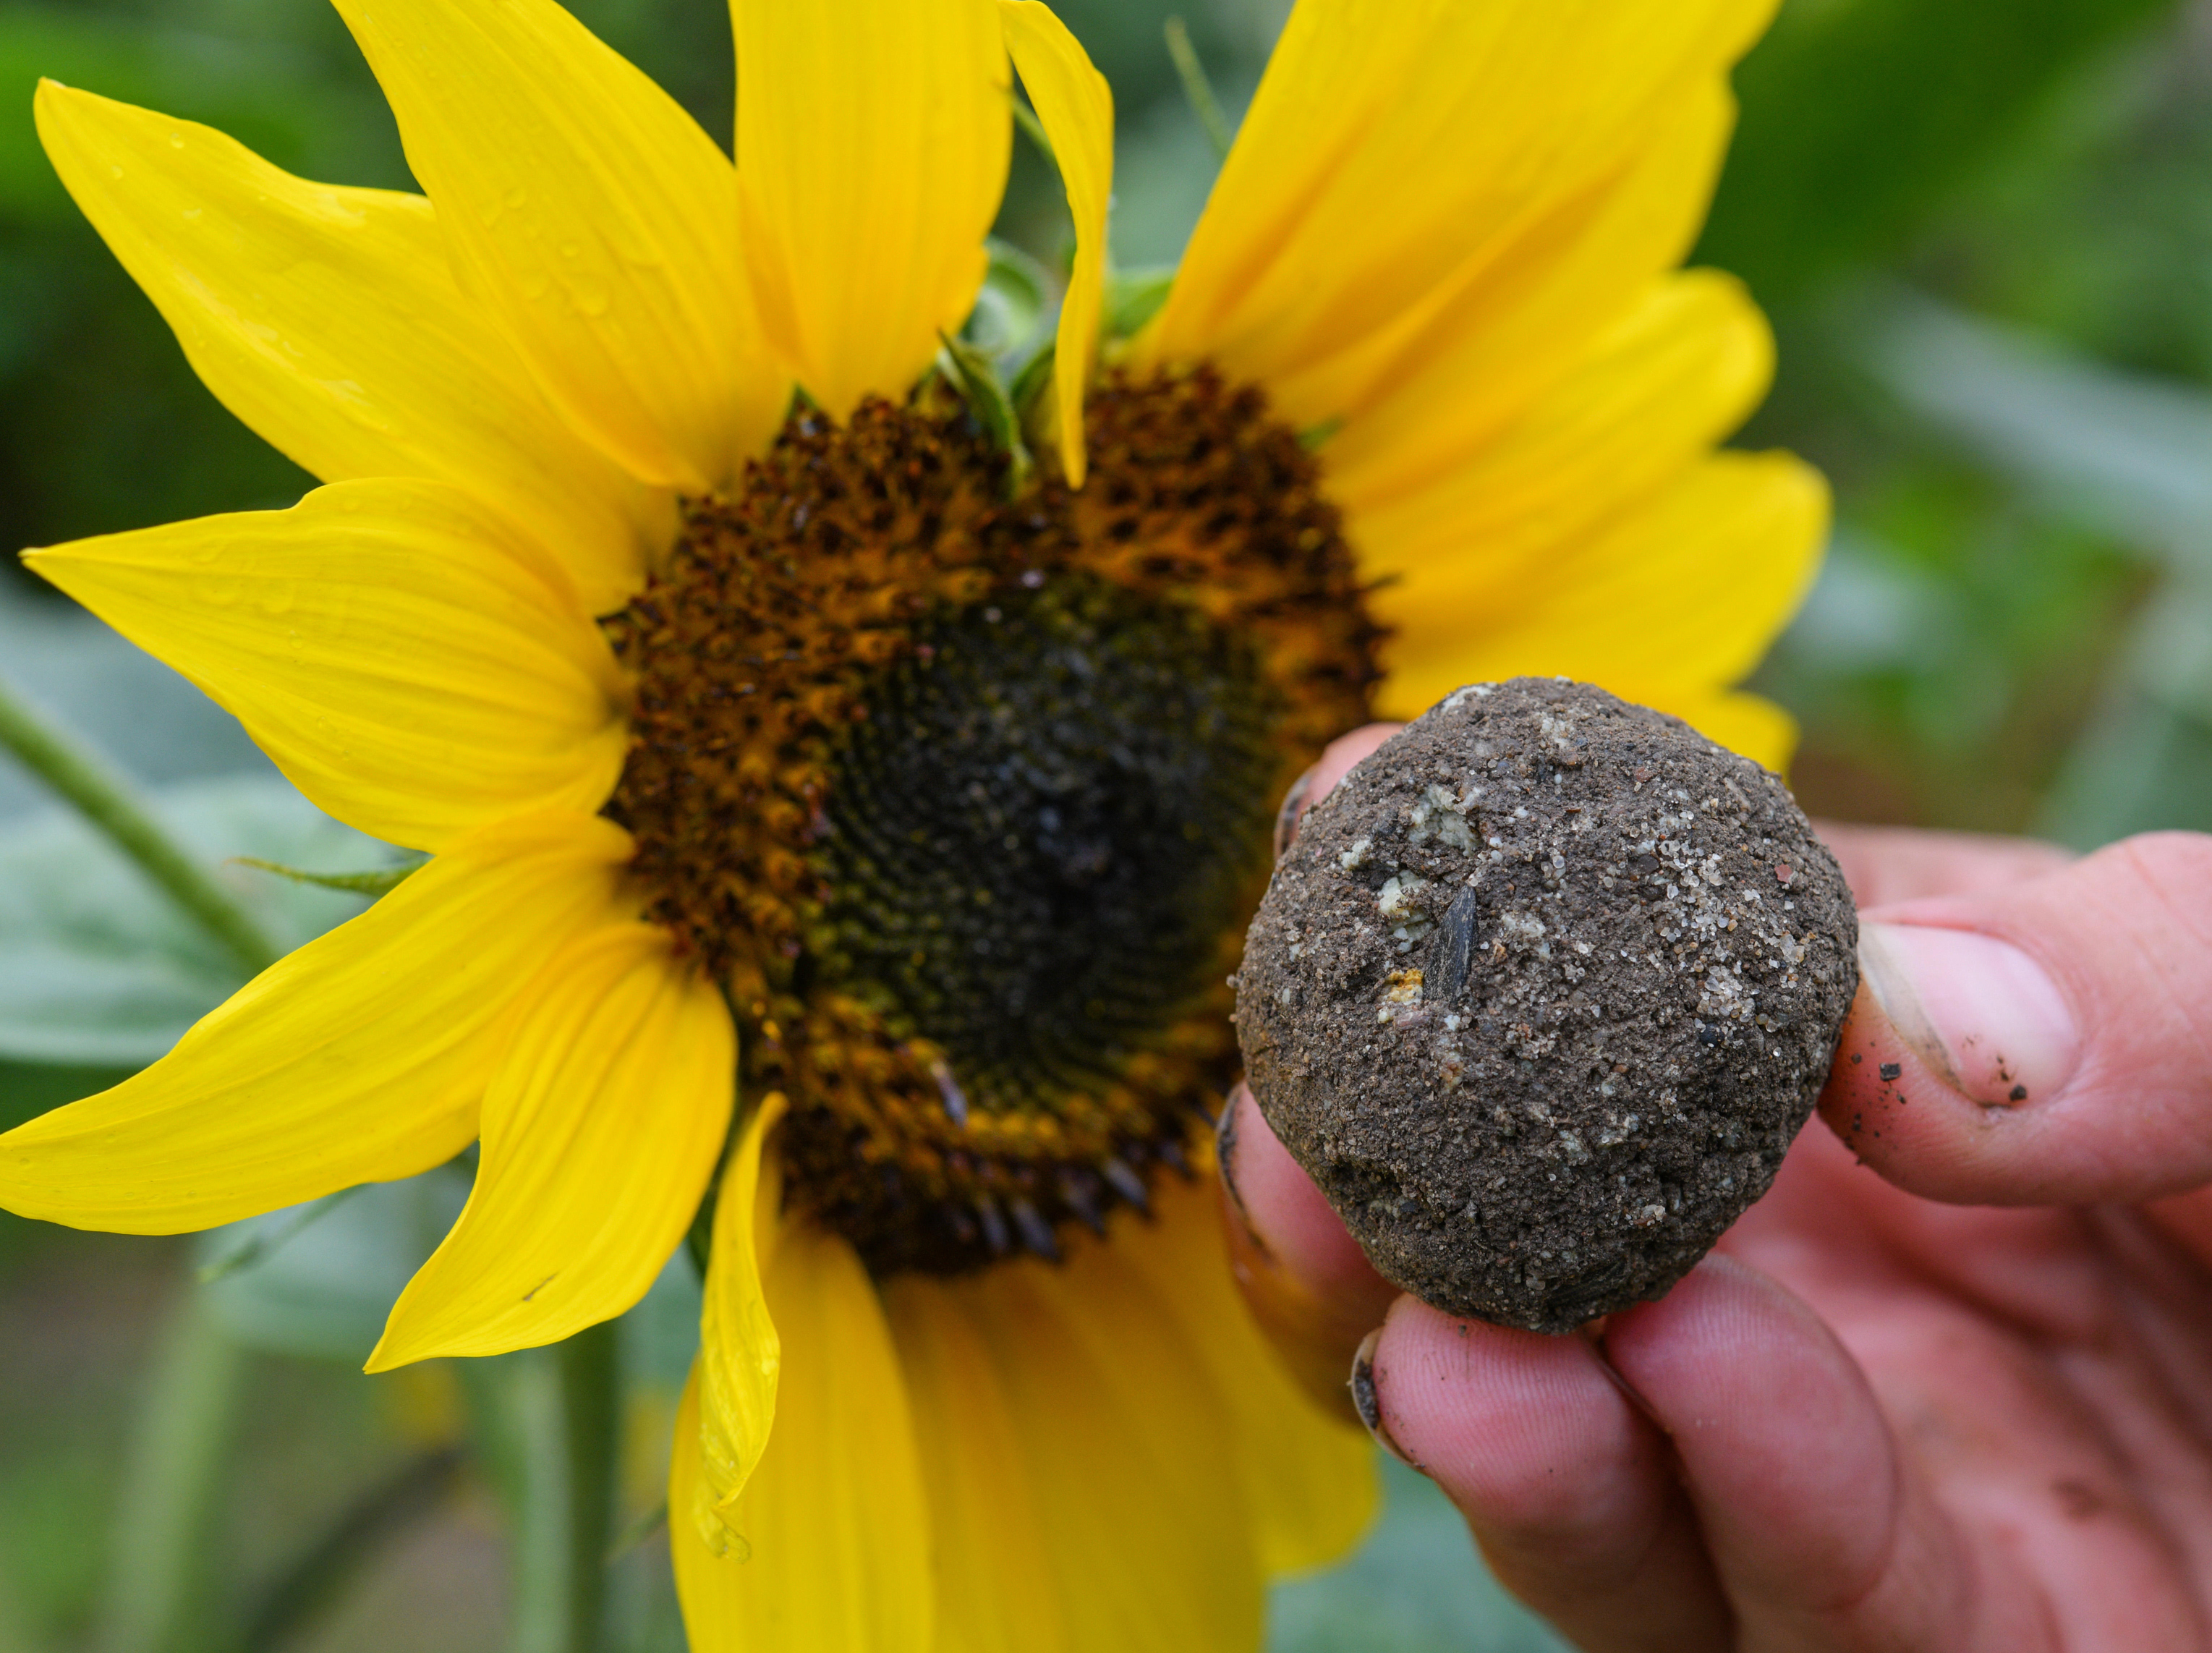 Someone holding a seedball next to a sunflower (Alamy/PA)